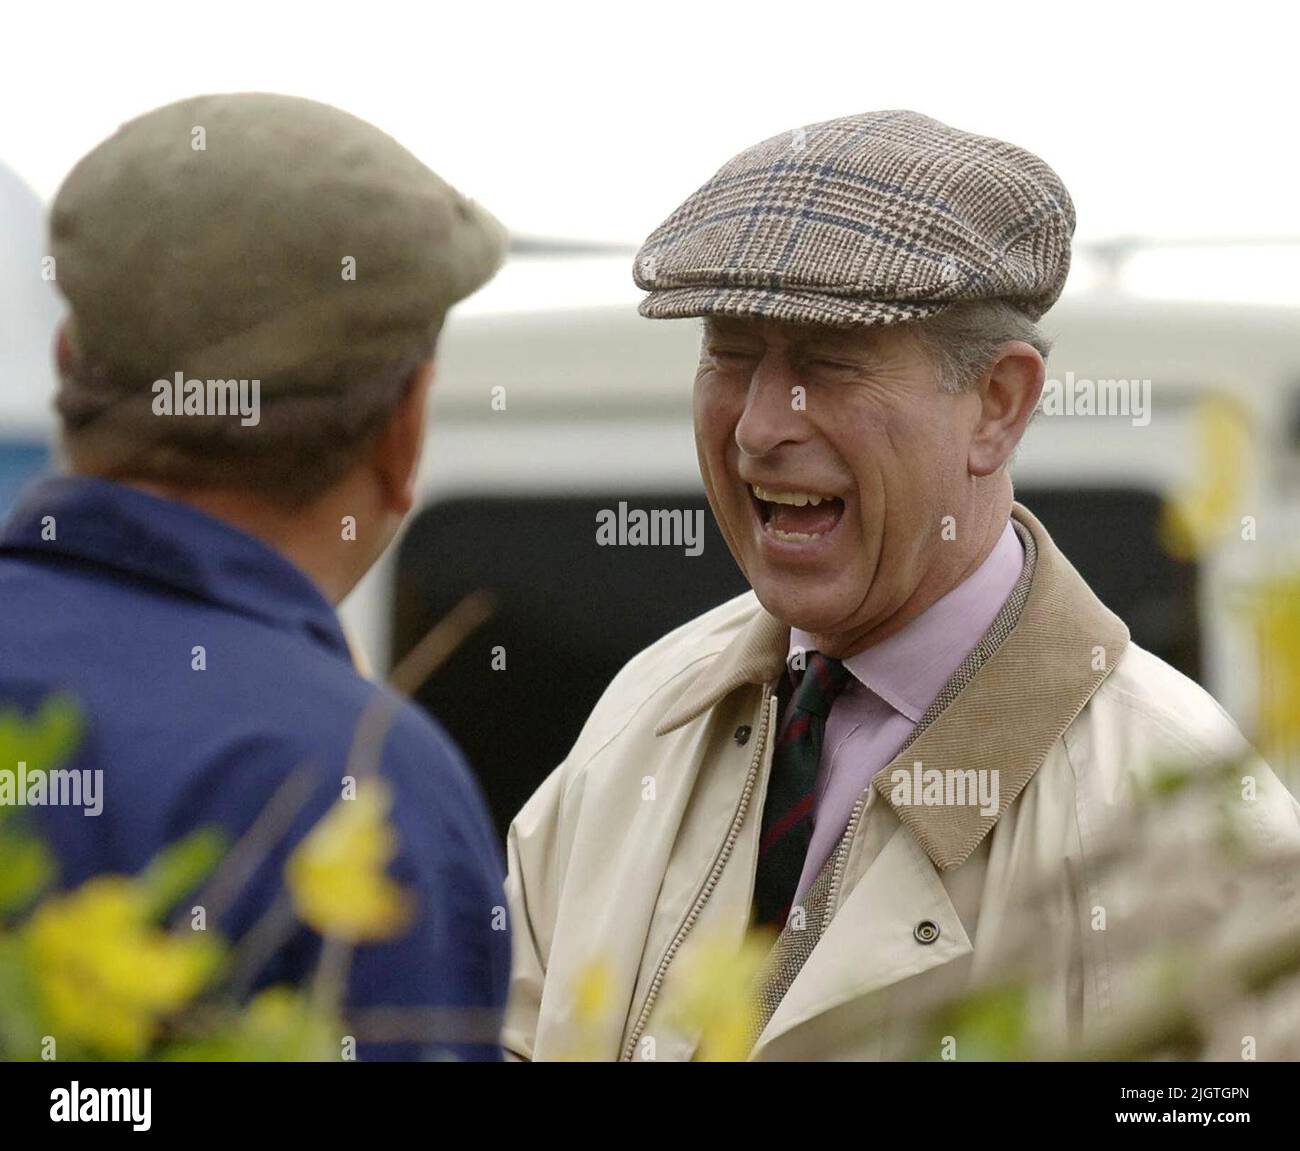 File photo dated 29/10/2005 of Prince of Wales is shown a Yorkshire Billhook by John Savings who was competing in the National Hedgelaying Championship at Tetbury, Gloucestershire. The Prince is a 'countryman to his very core' and it is where he 'finds true peace', the Duchess of Cornwall has written in a personal tribute to her husband. Camilla, who guest edited Country Life magazine to mark her 75th birthday, selected her decades-long partner Charles as one of her rural heroes in an article she penned for the publication. Issue date: Wednesday July 13, 2022. Stock Photo